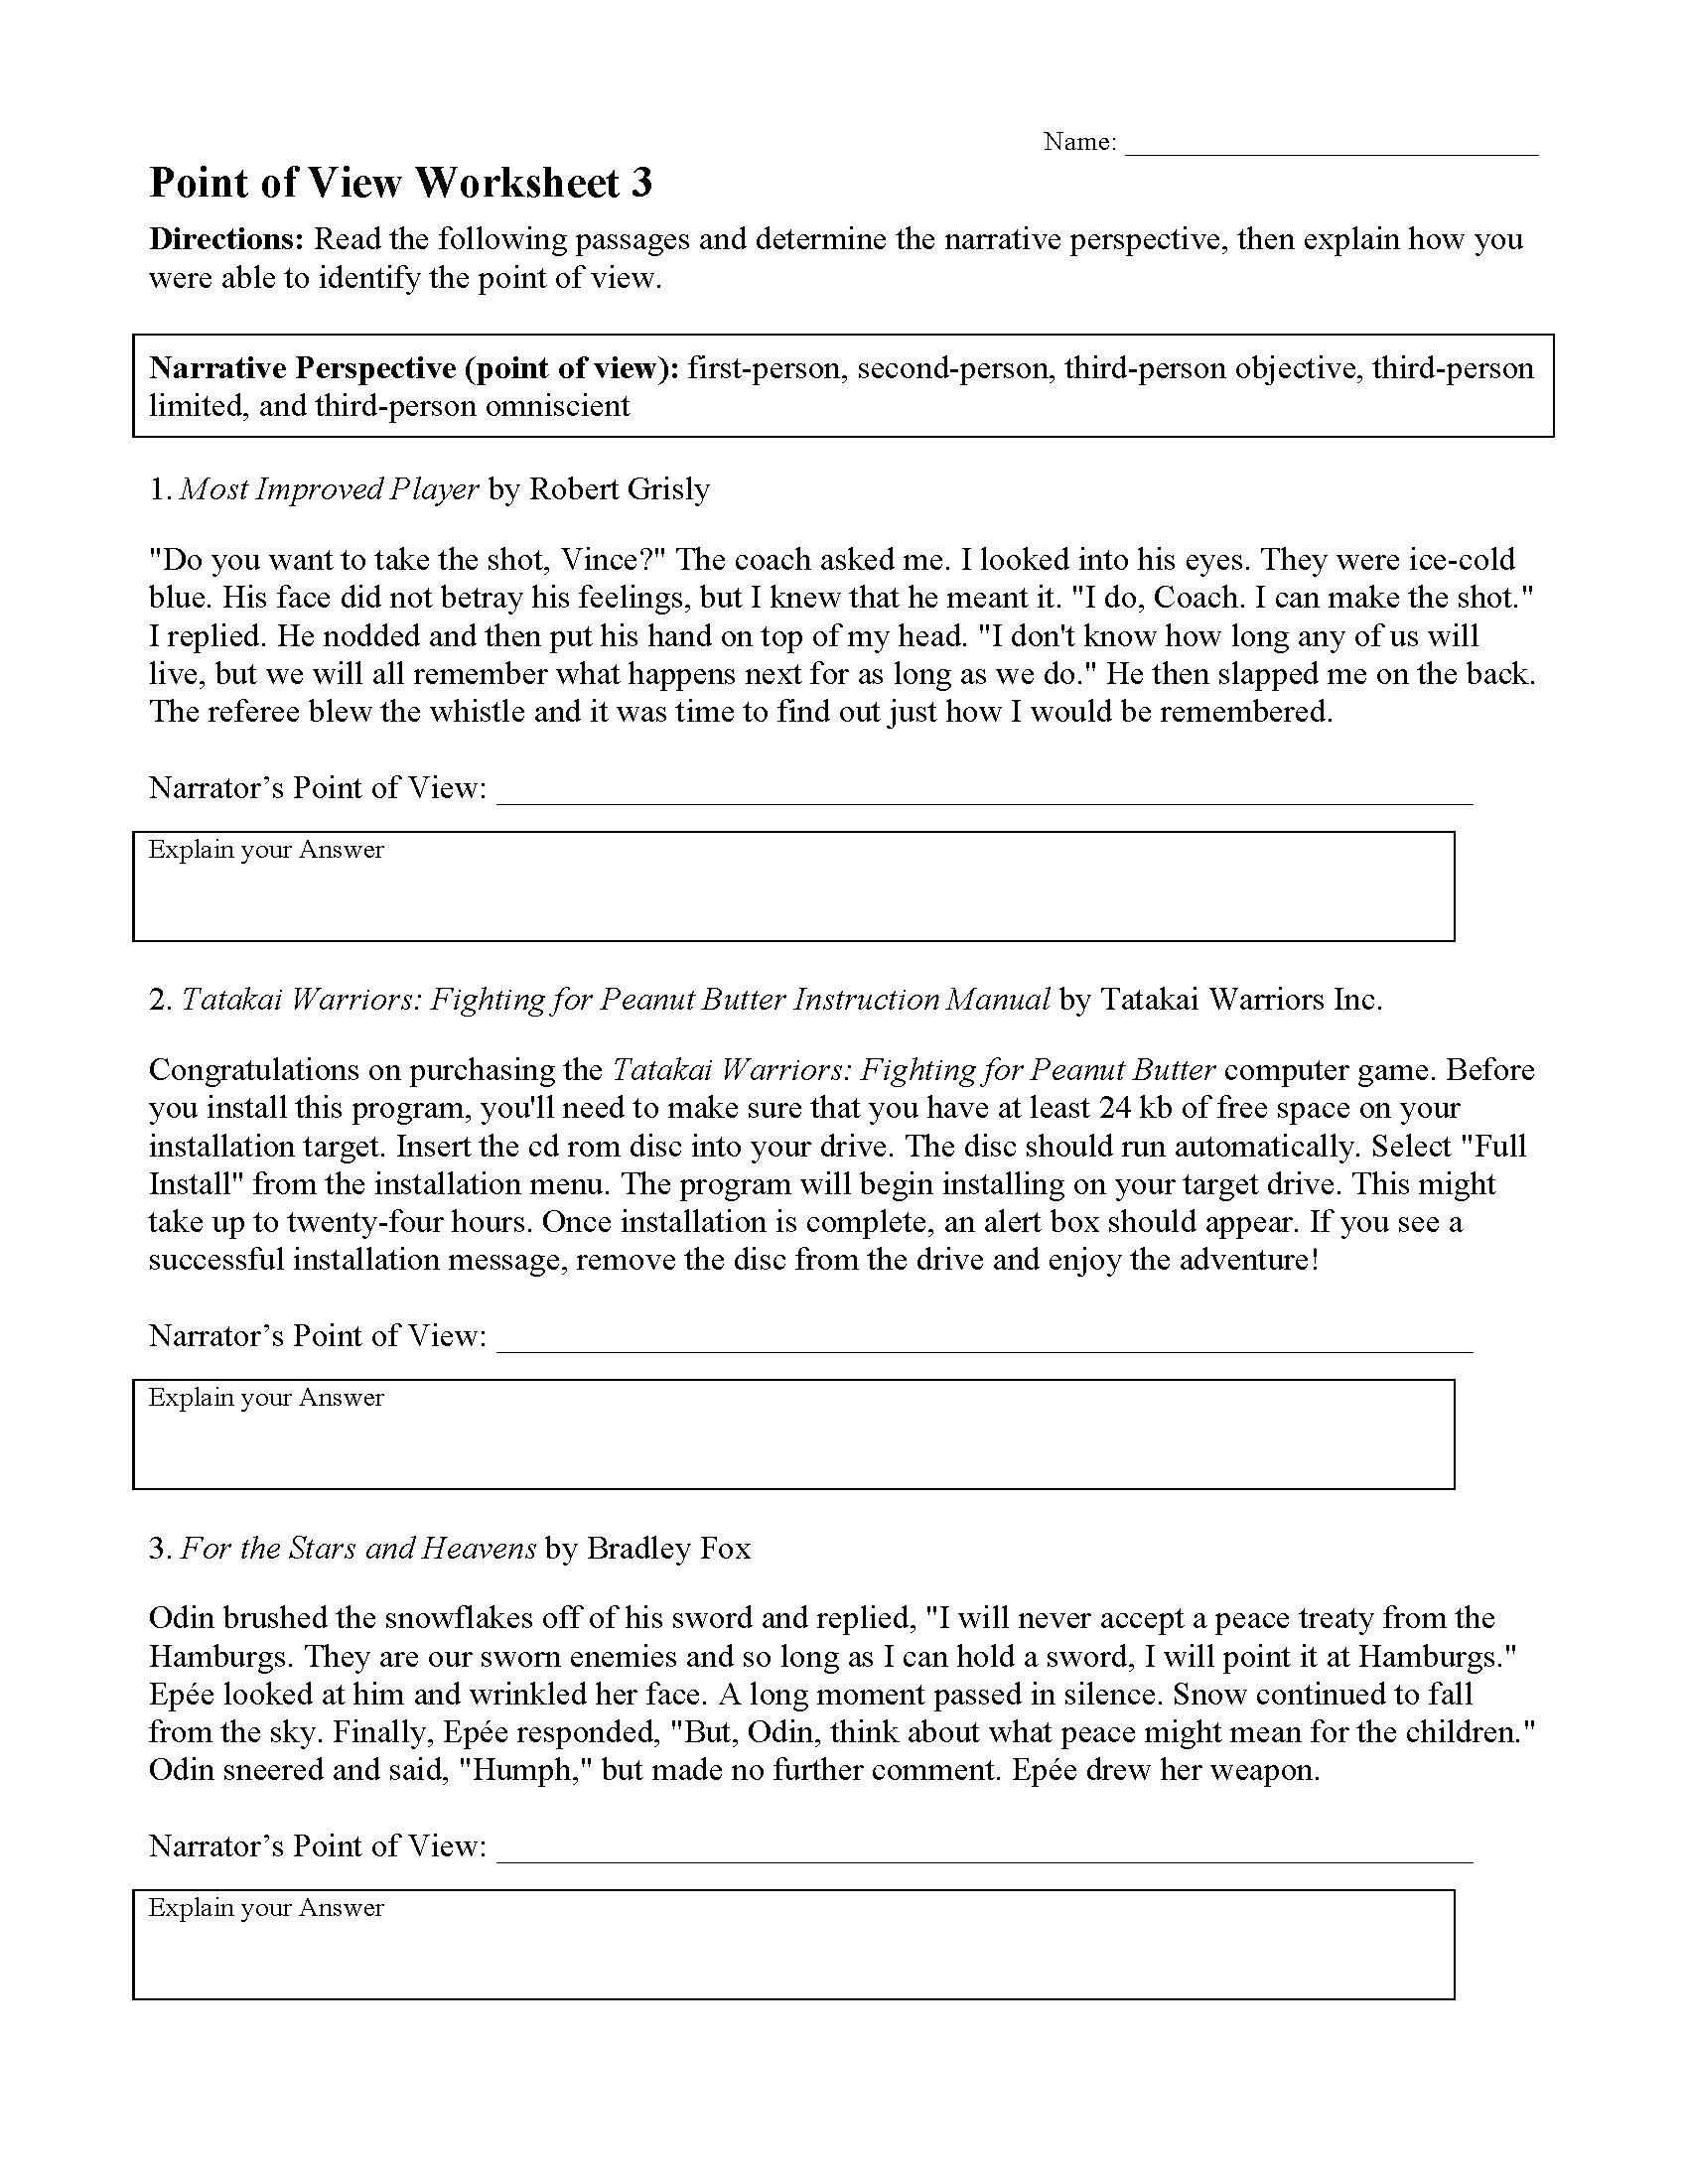 point-of-view-worksheet-3-reading-activity